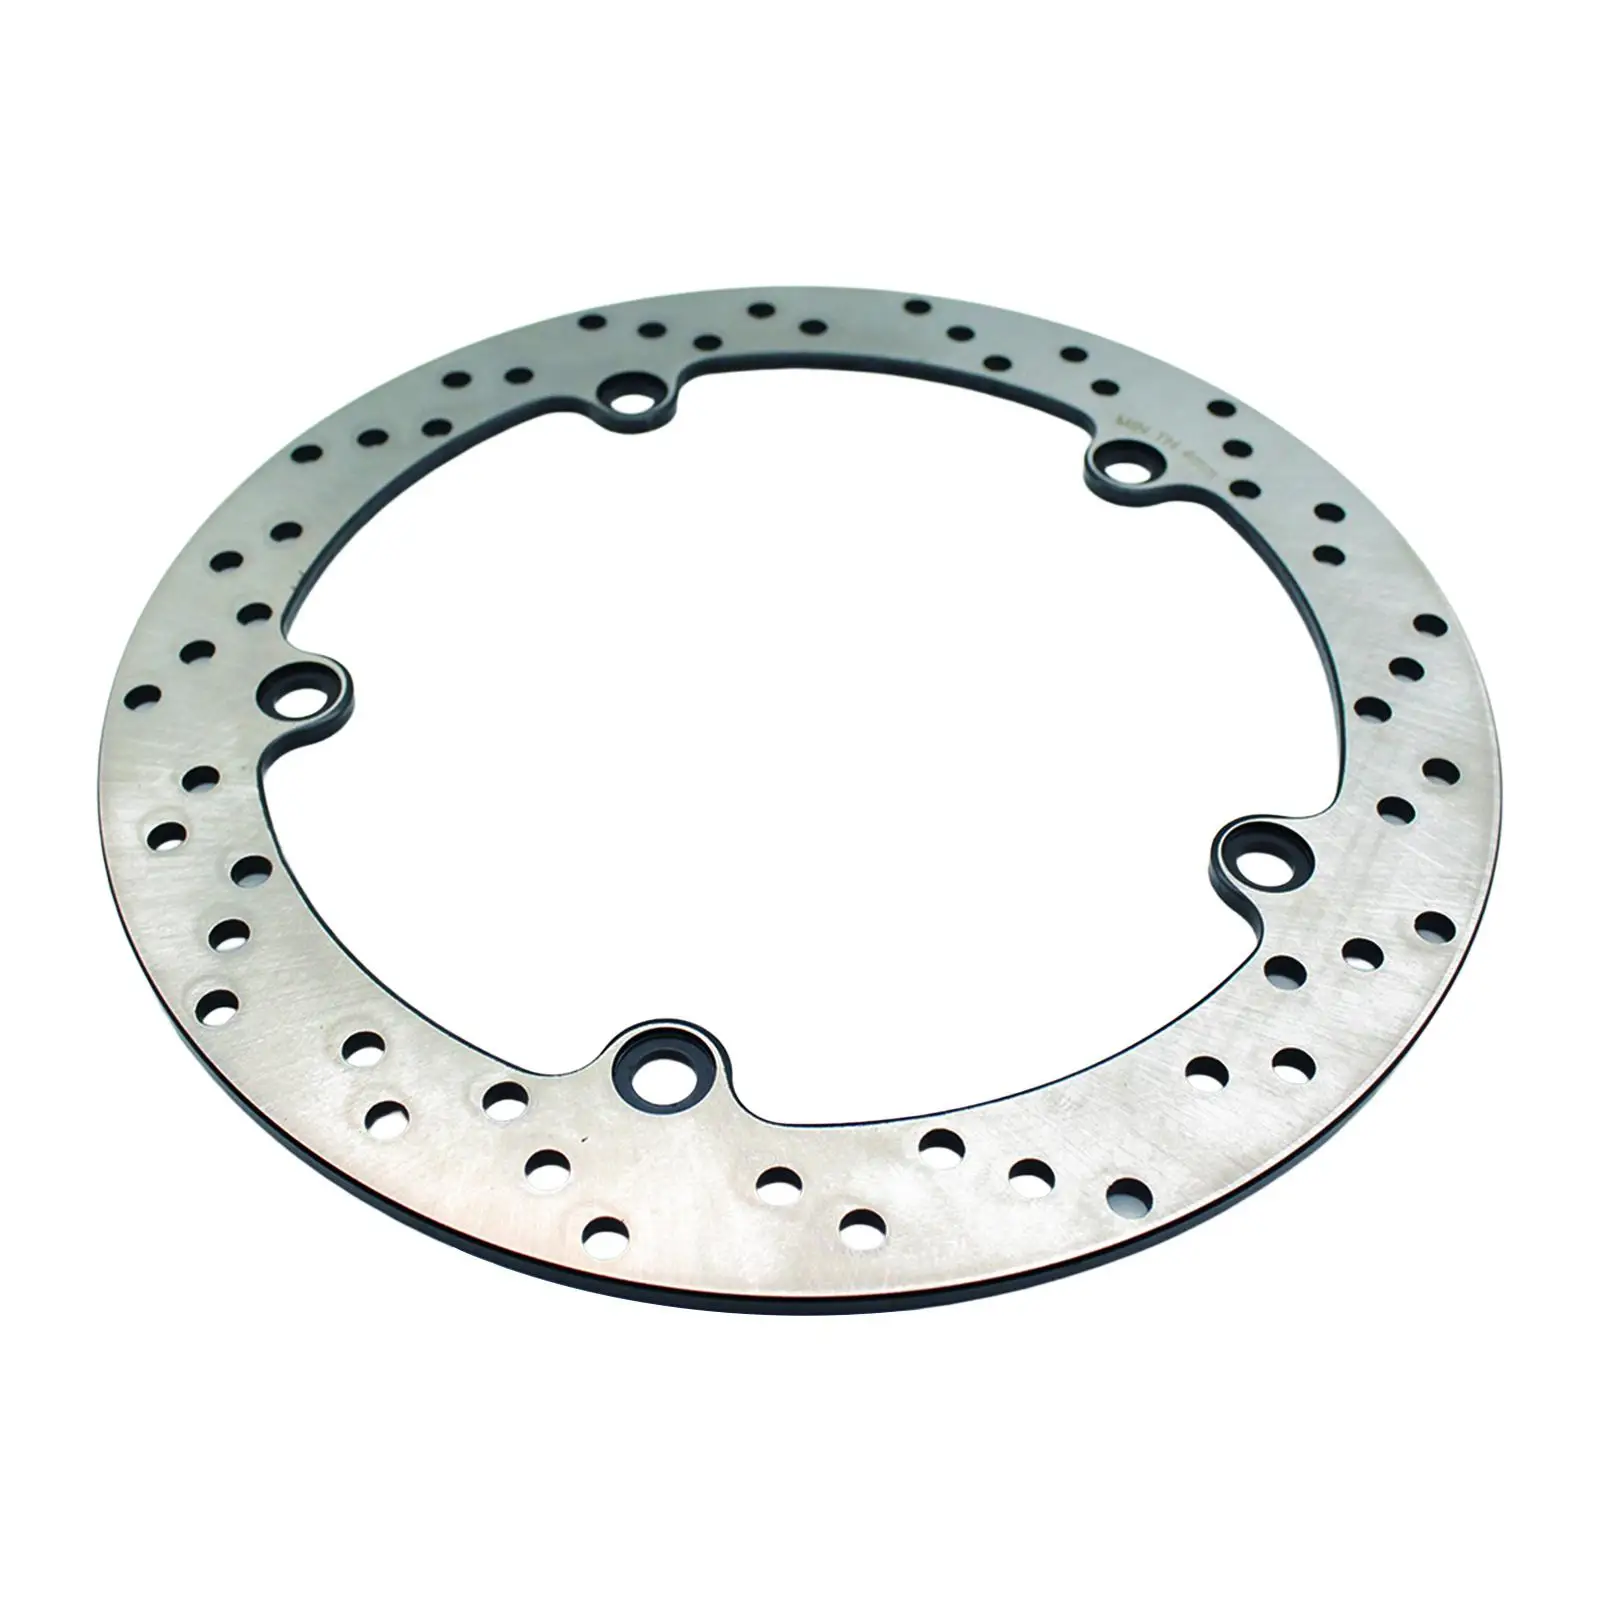 Motorcycle Rear Brake Disc Rotor for BMW R1100GS R1150RS R1150R Durable Direct